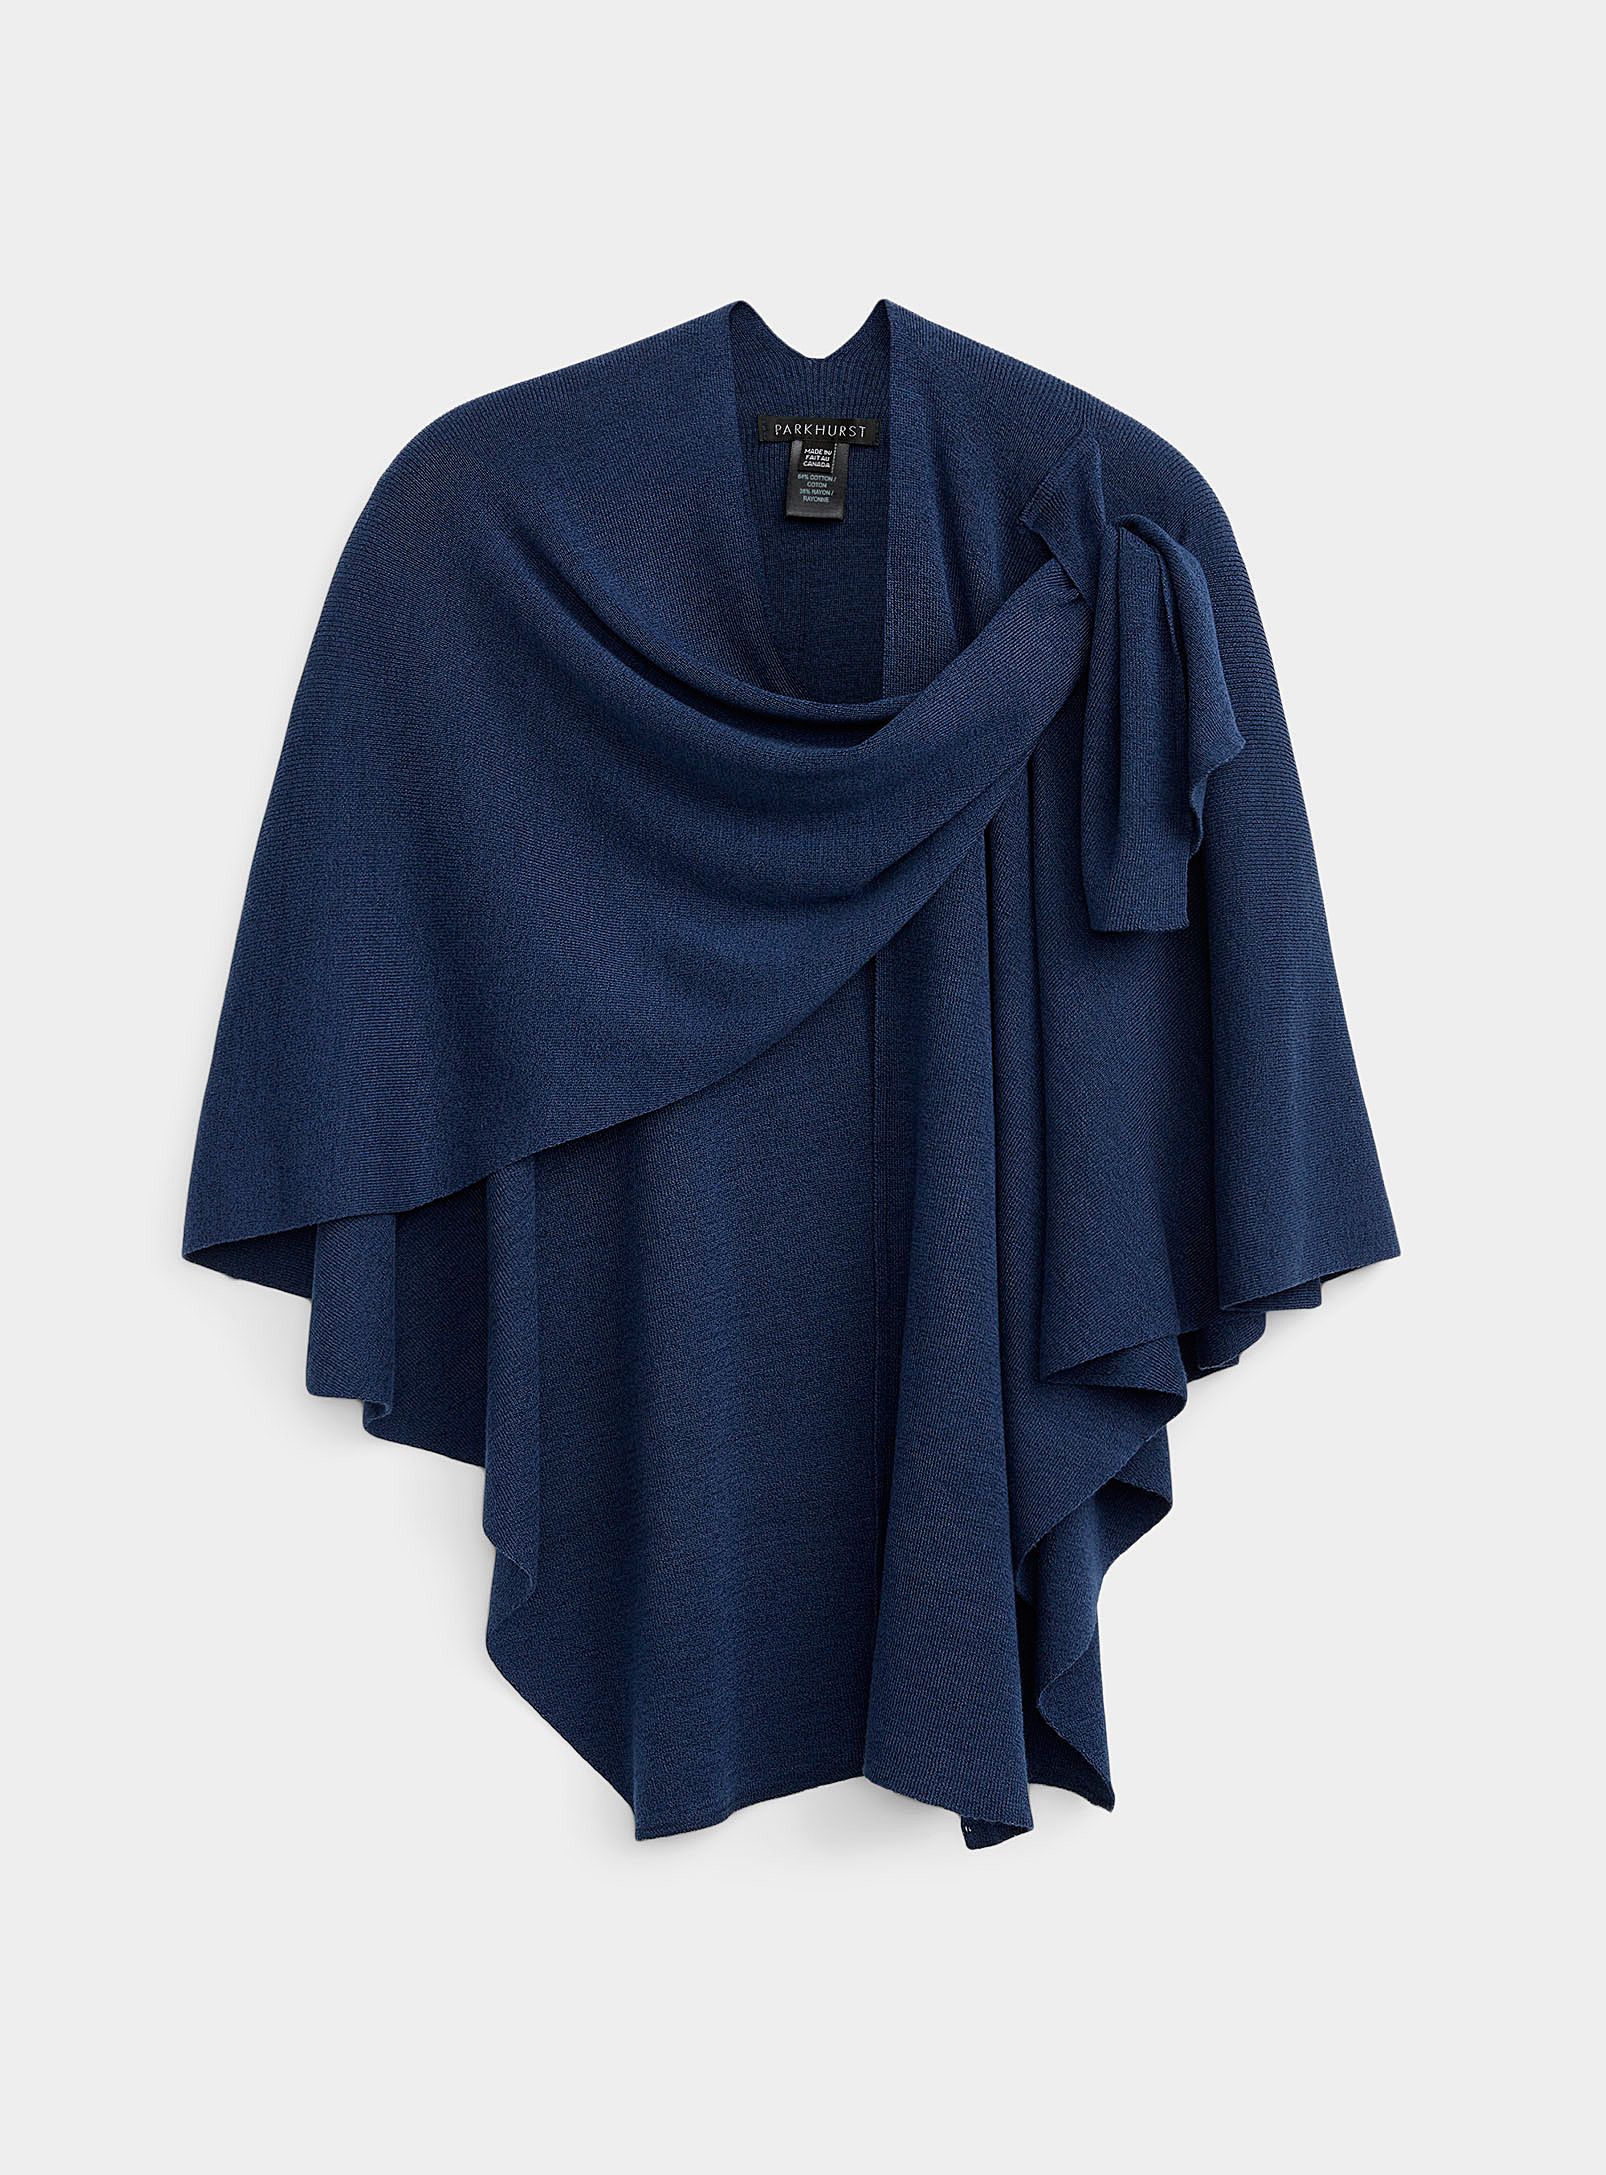 Parkhurst Finely Knit Draped Shawl In Blue